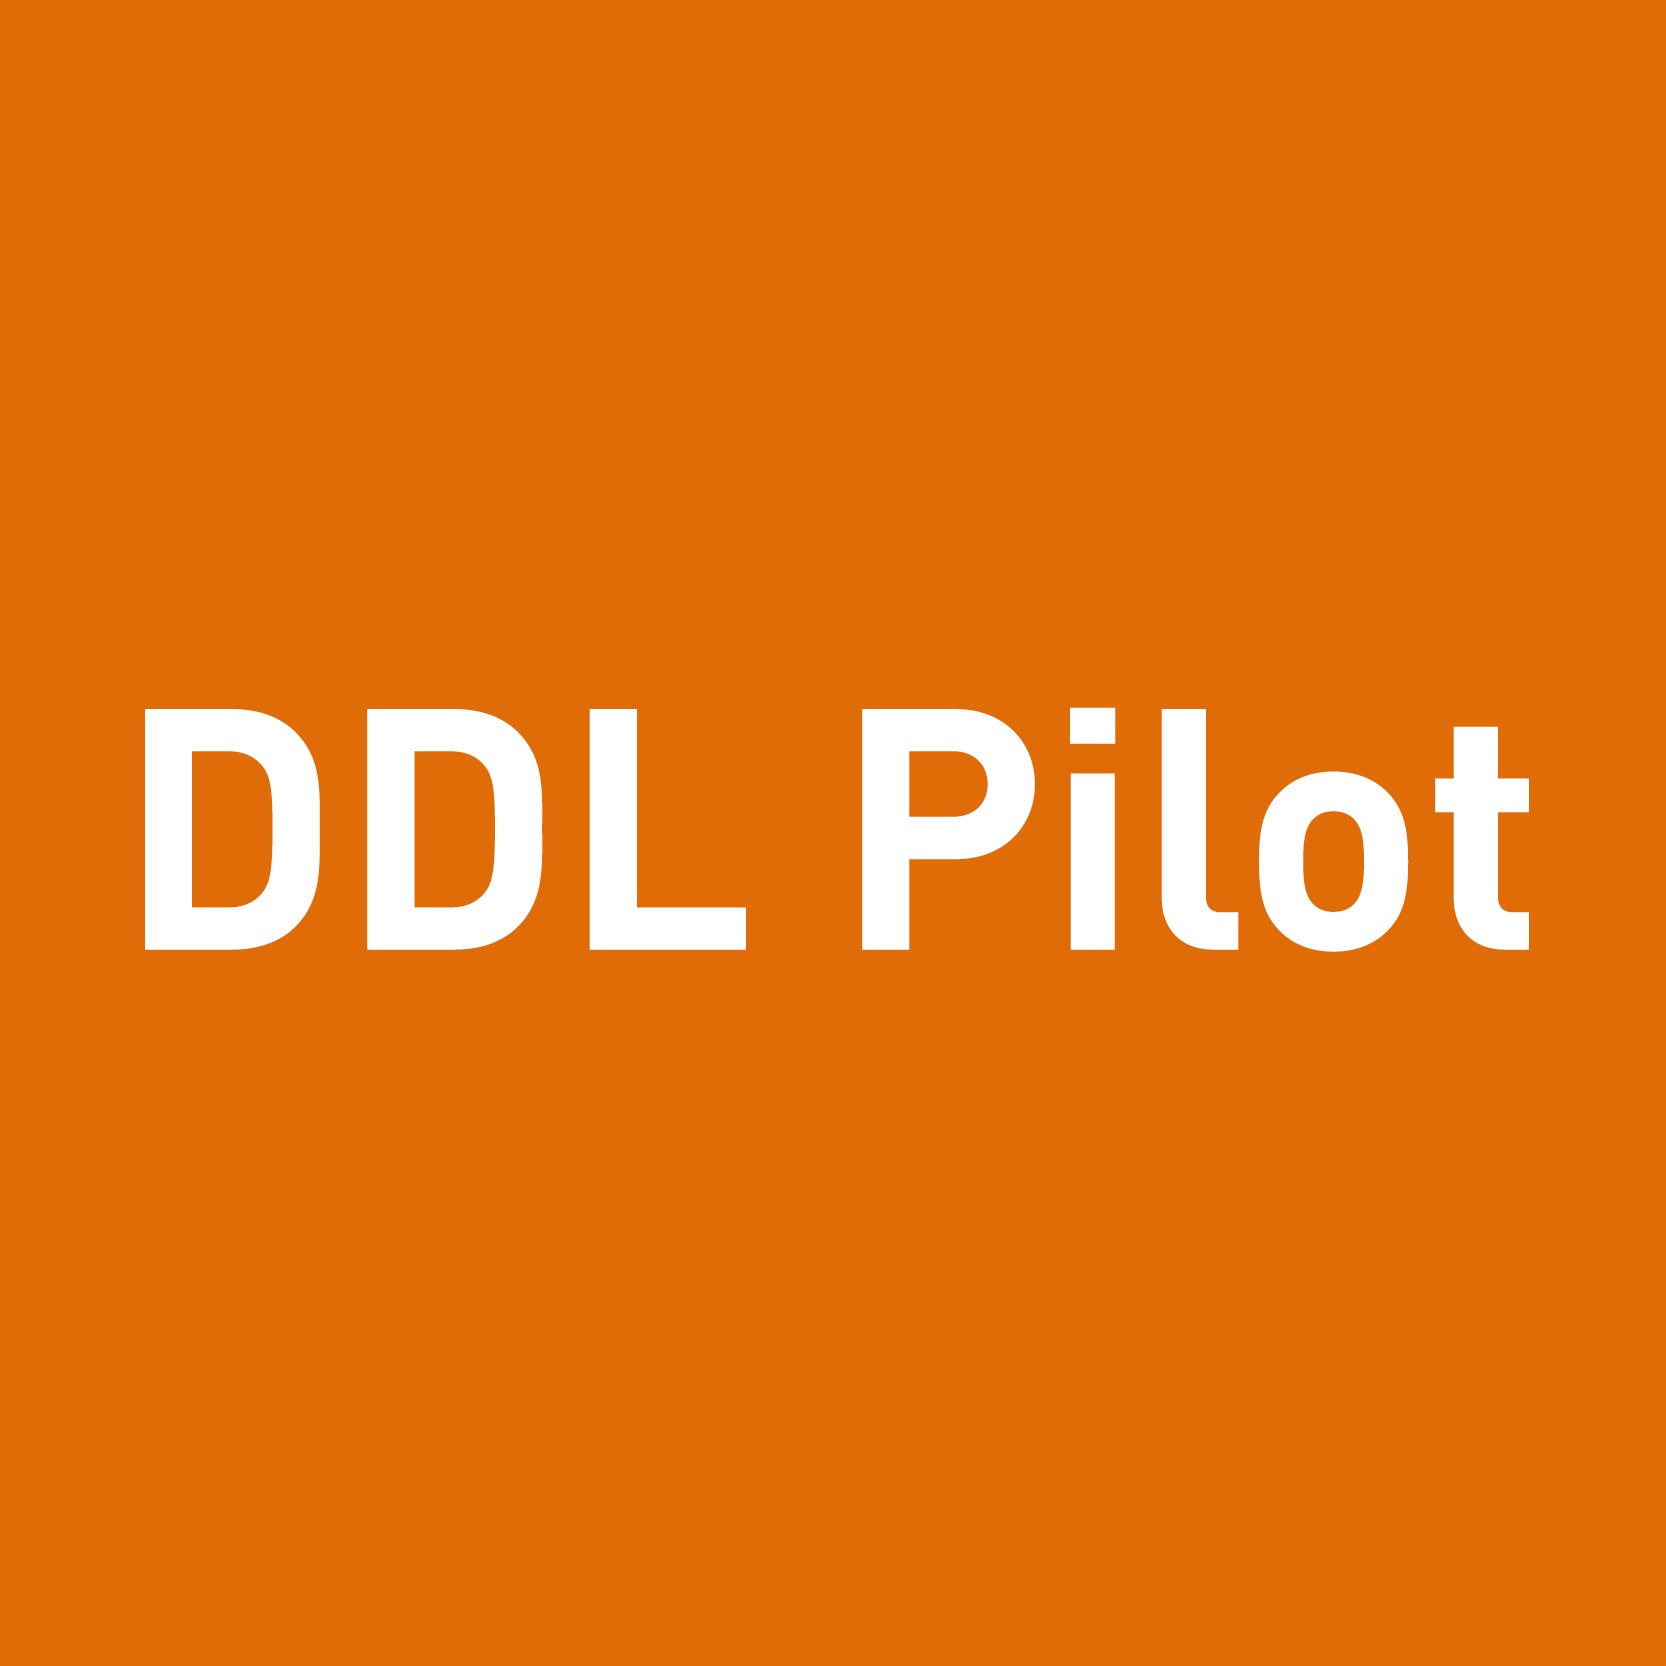 Stay up to date with the latest and greatest DDL pilot and digital identity industry happenings!
Inquiries: ddlpilot@gemalto.com